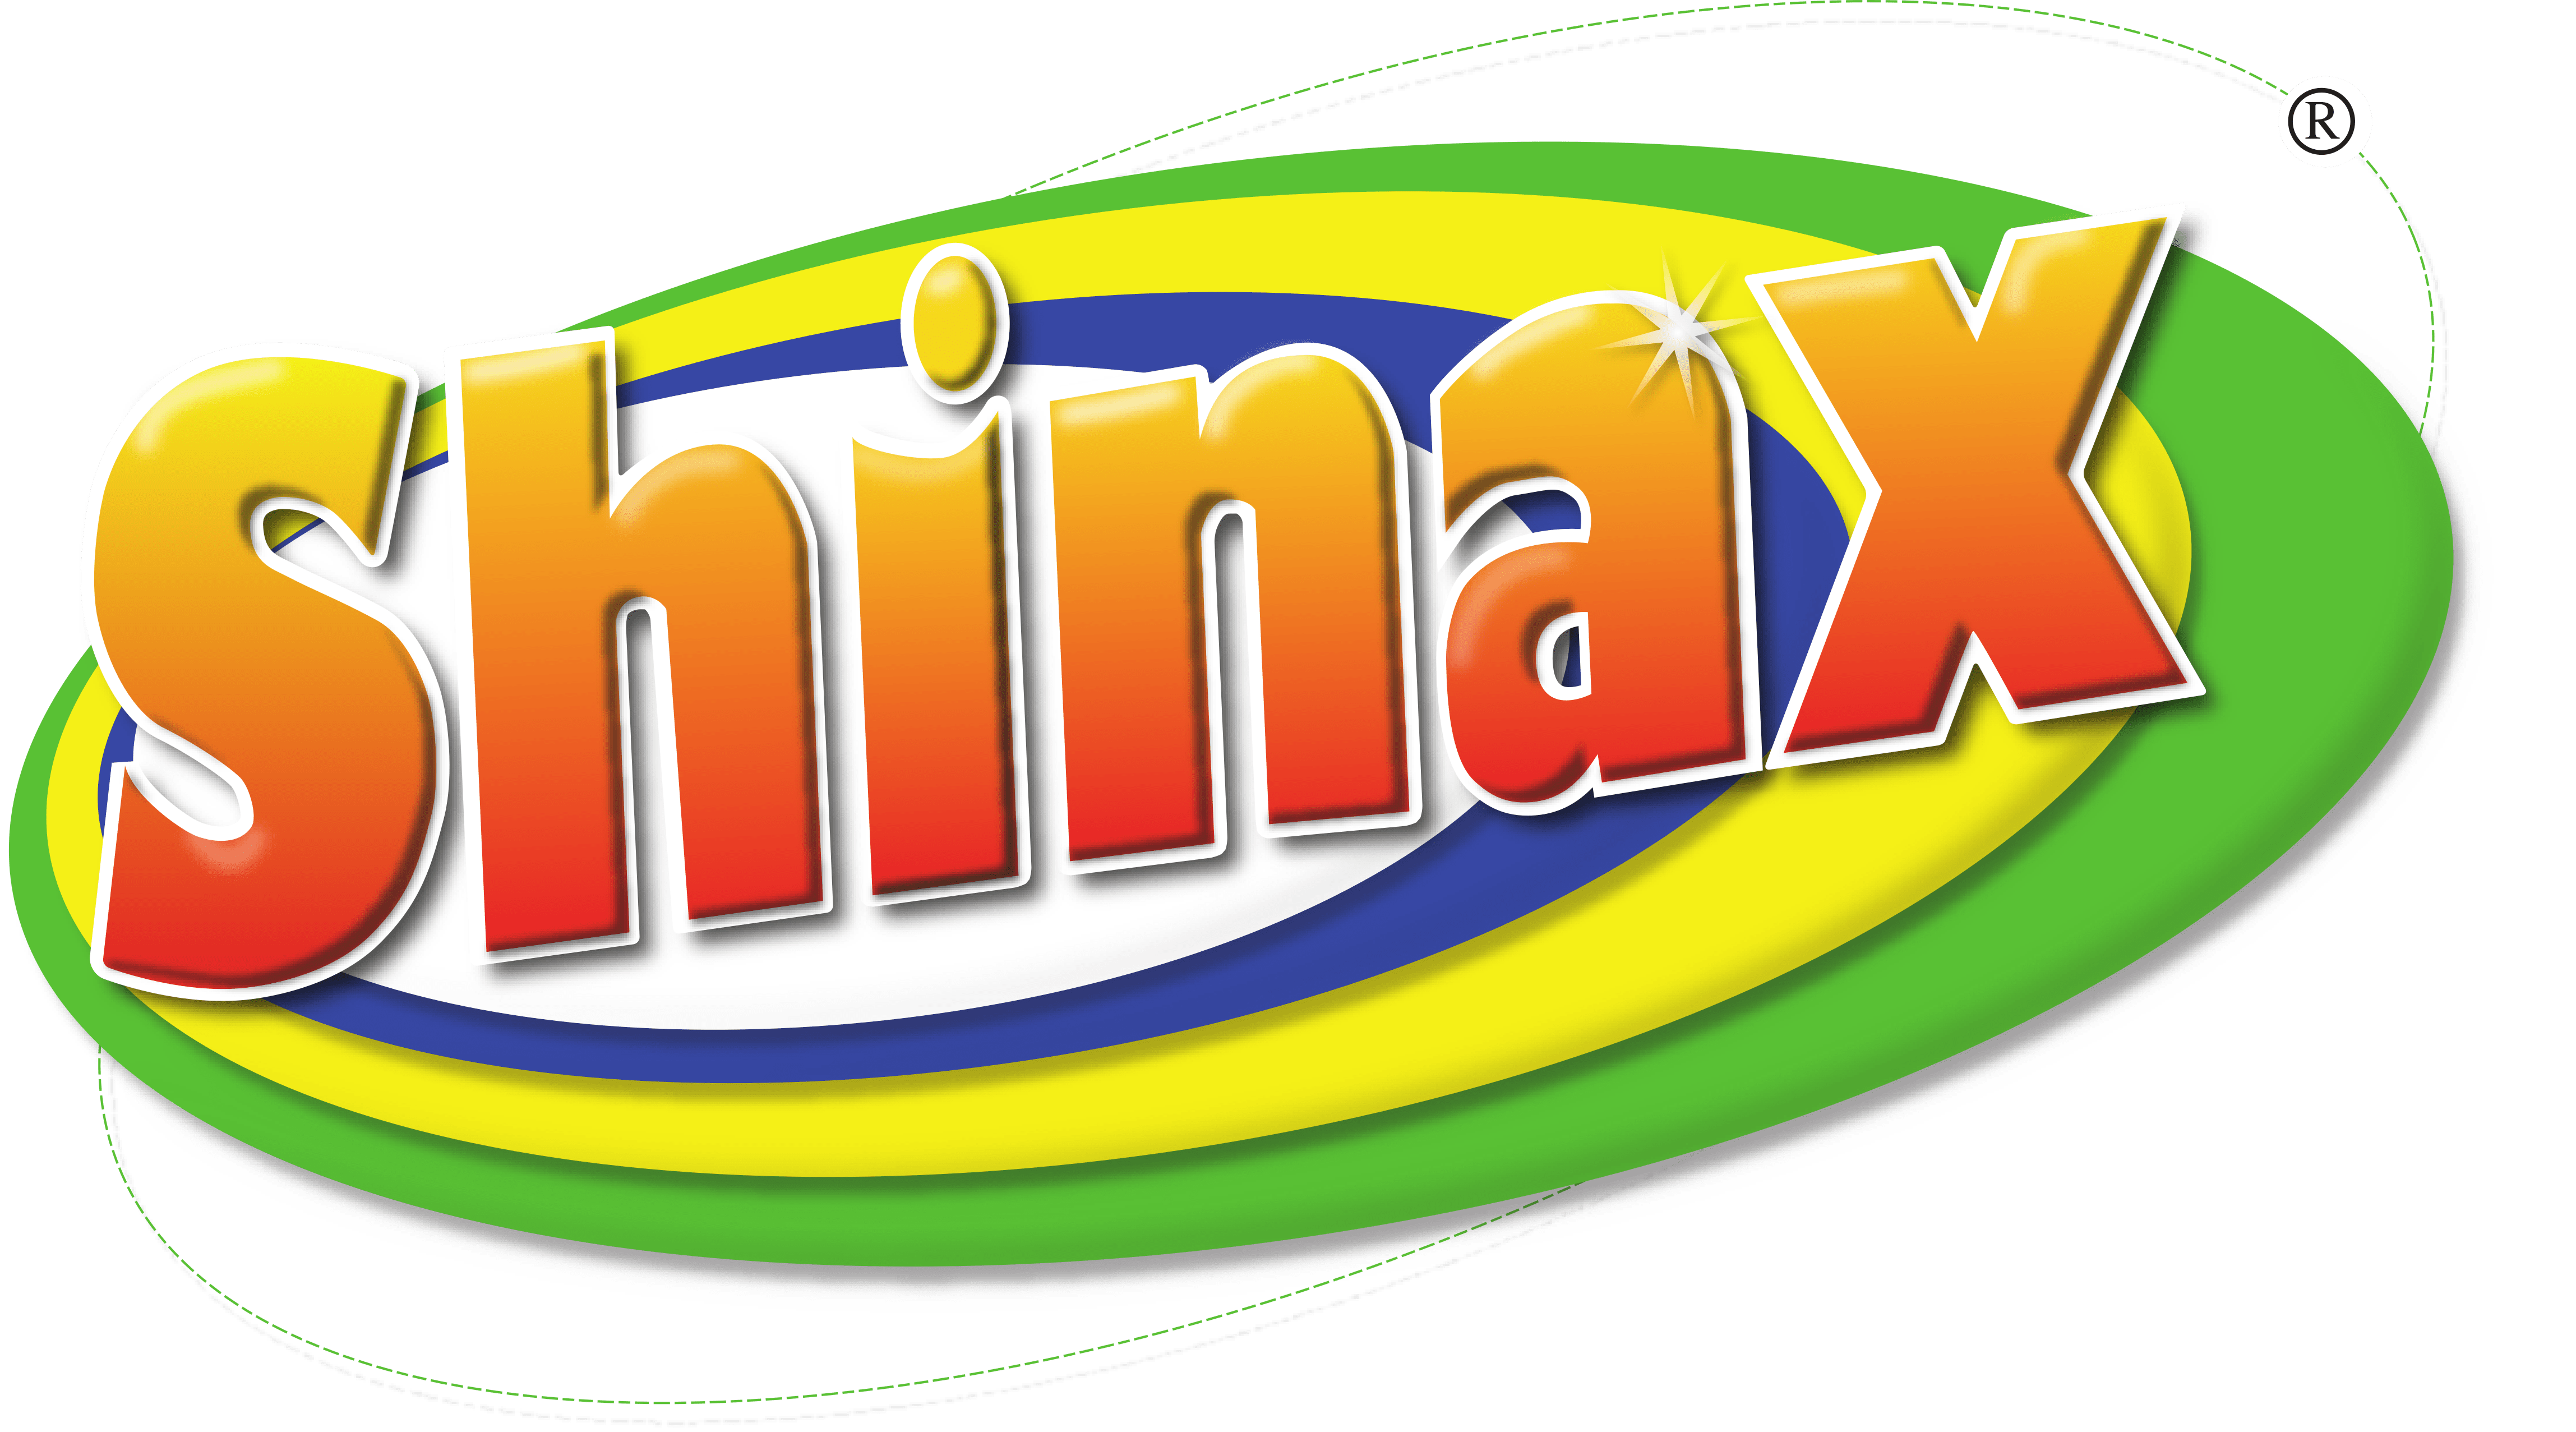 <h2 style="color:black">The Home of Shinax</h2>